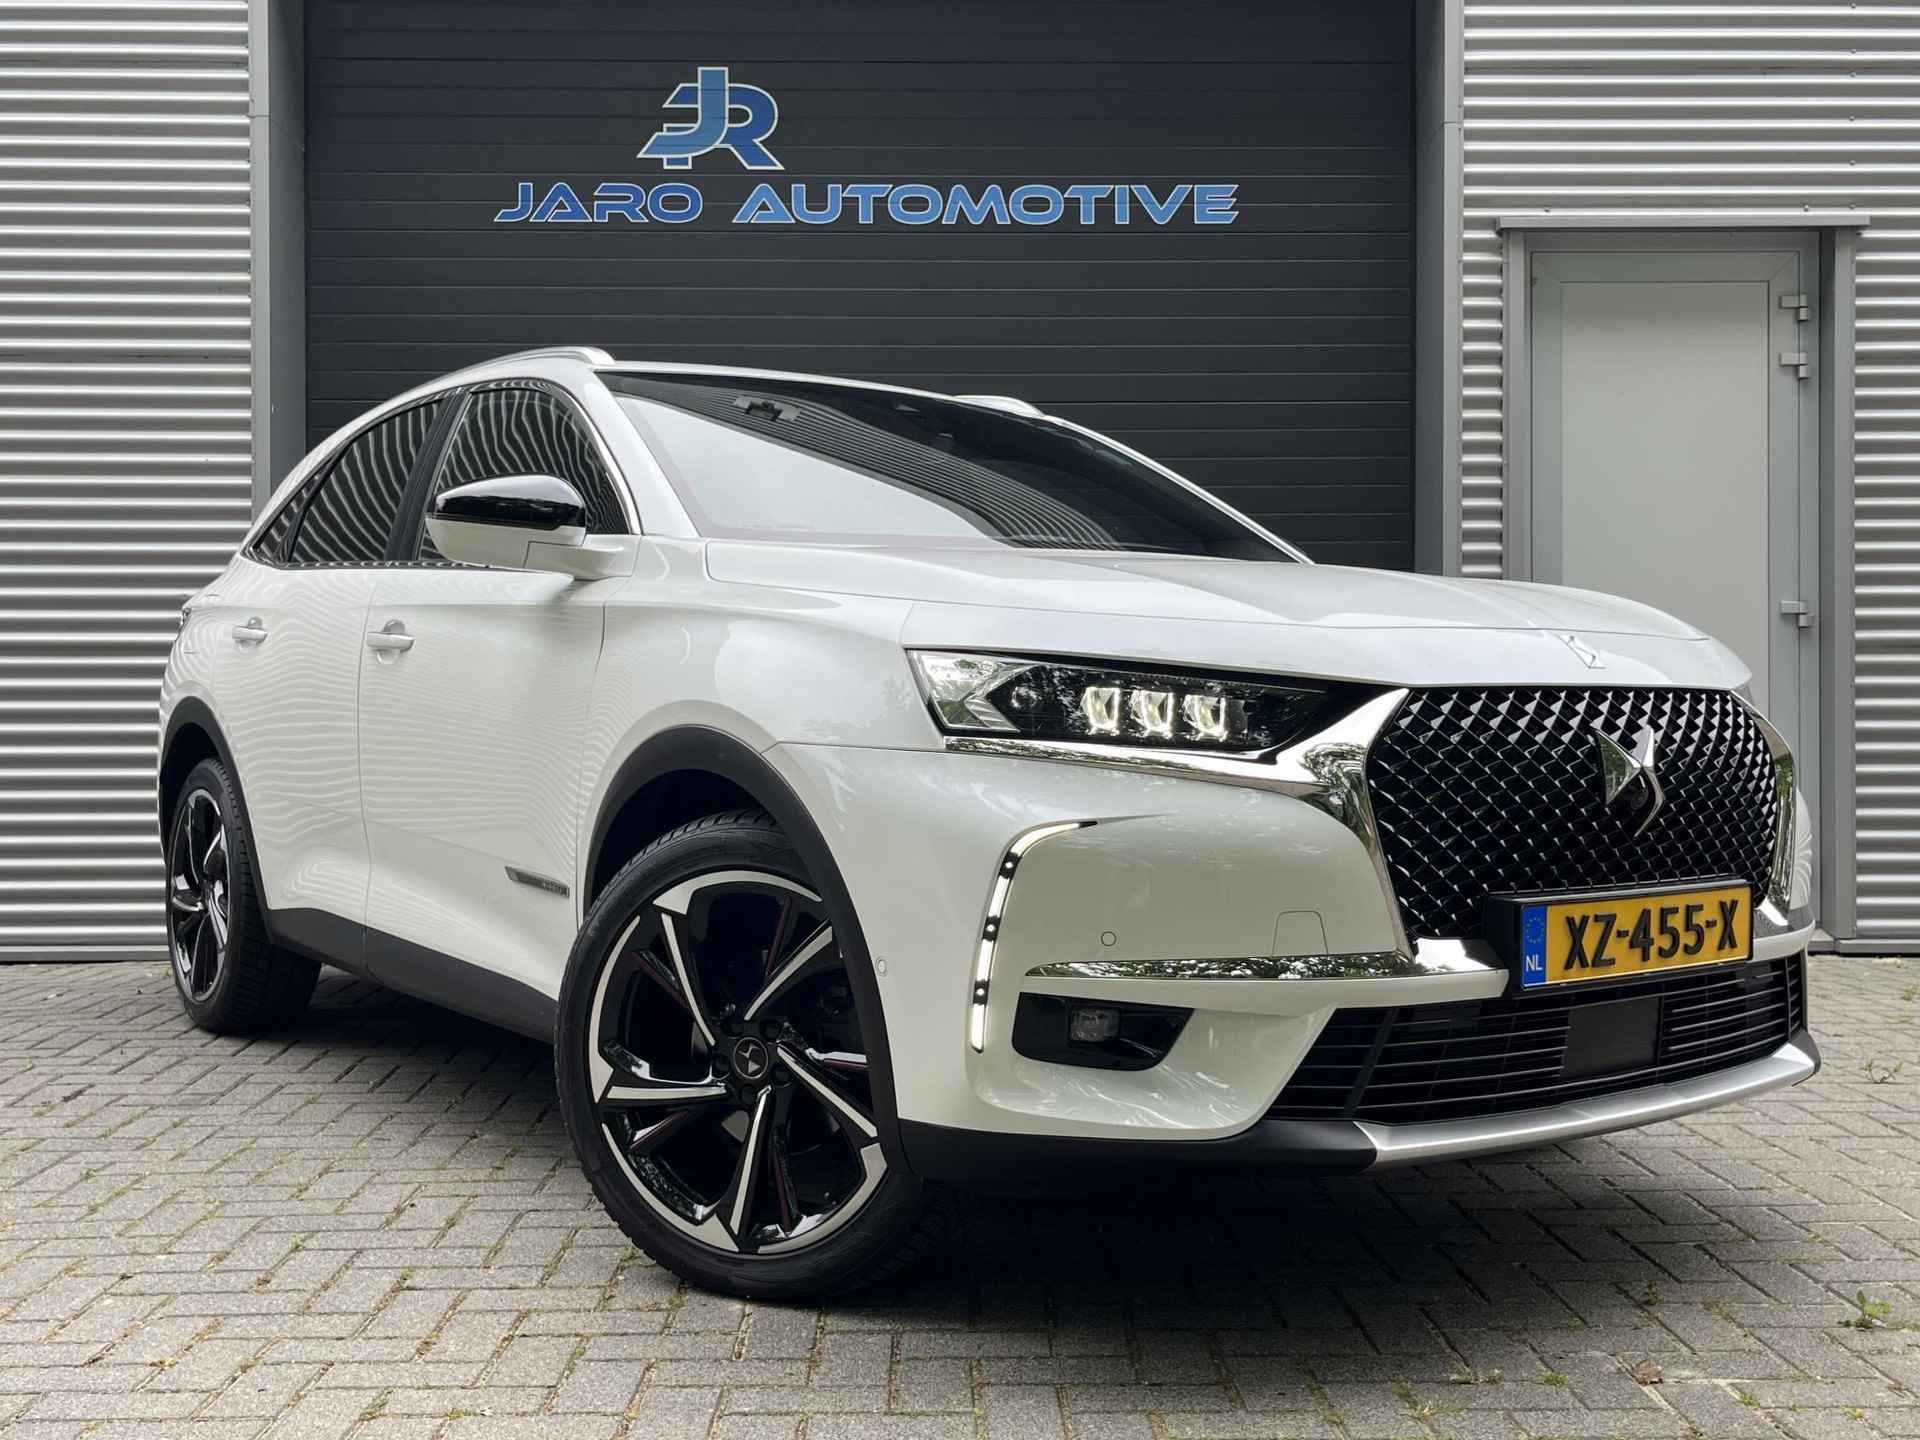 DS 7 Crossback 1.6 PureTech So Chic Full options - 3/91